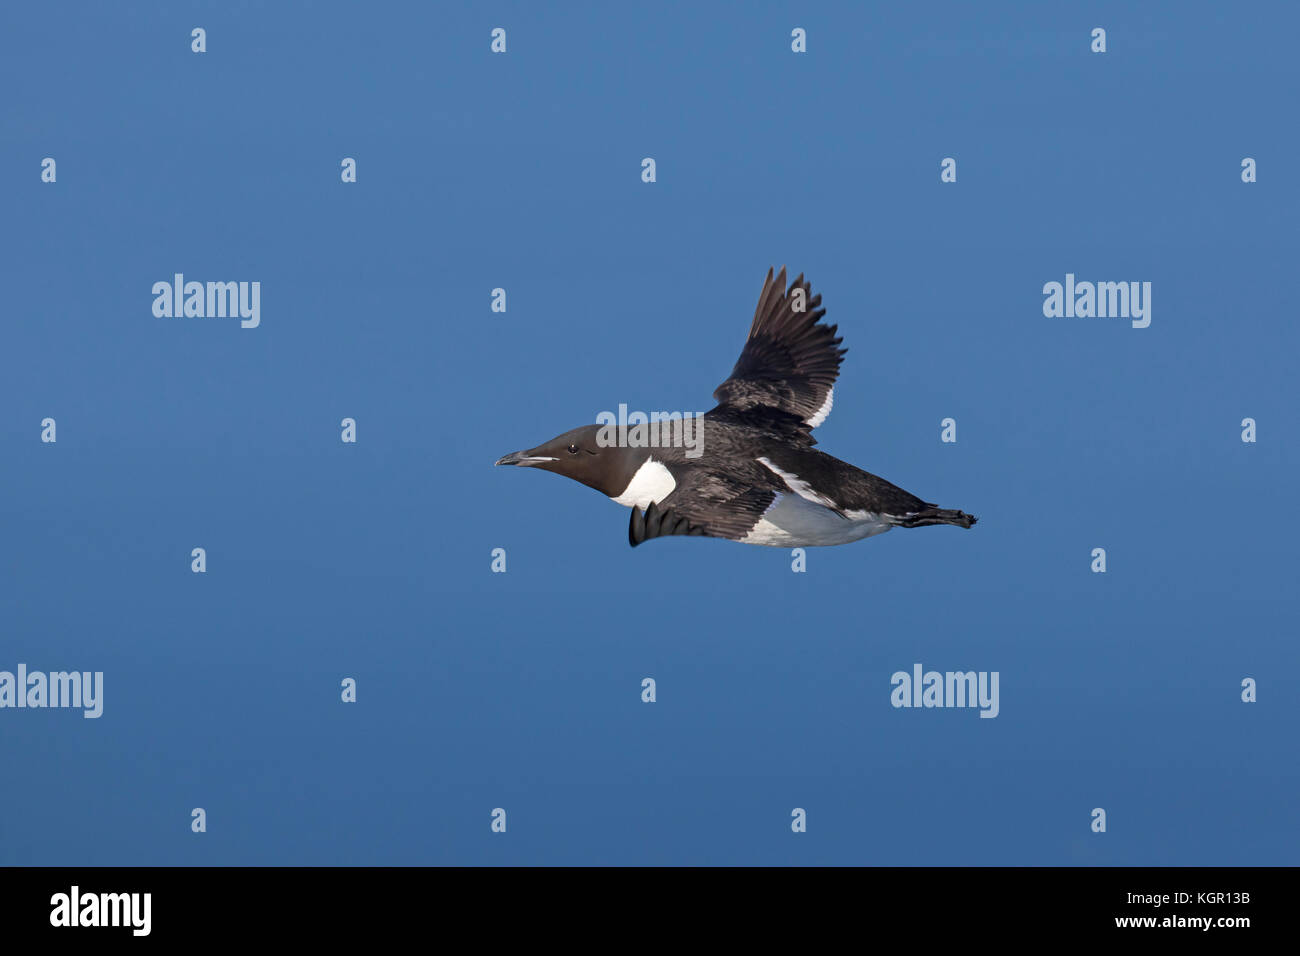 Thick-billed murre / Brünnich's guillemot (Uria lomvia) in flight against blue sky, native to the sub-polar regions of the Northern Hemisphere Stock Photo